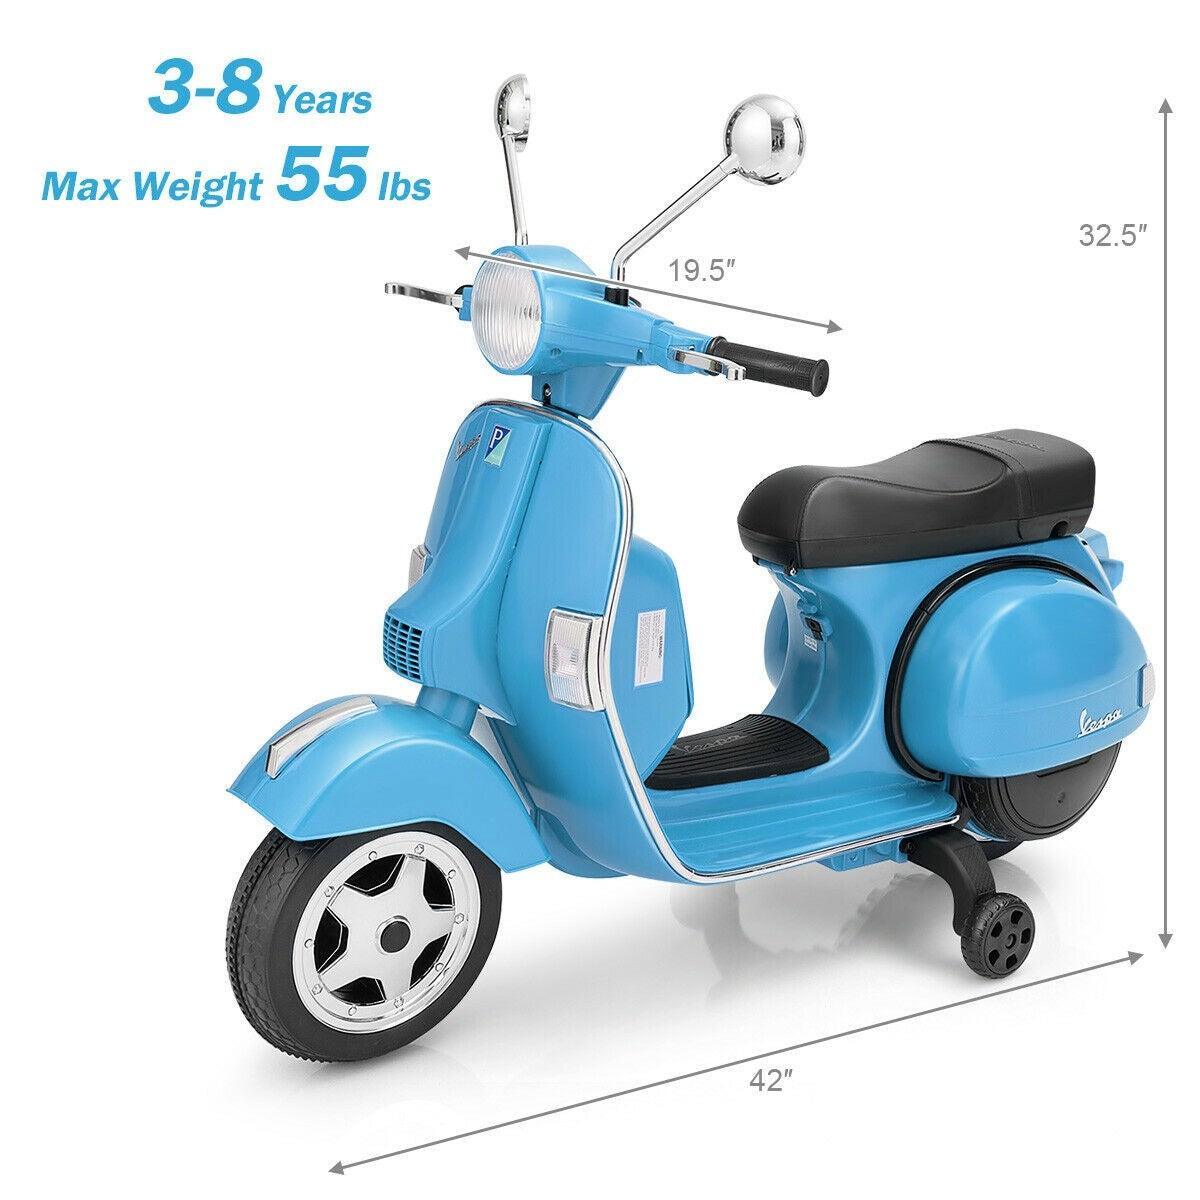 Scooter Motorcycle TY327441 size